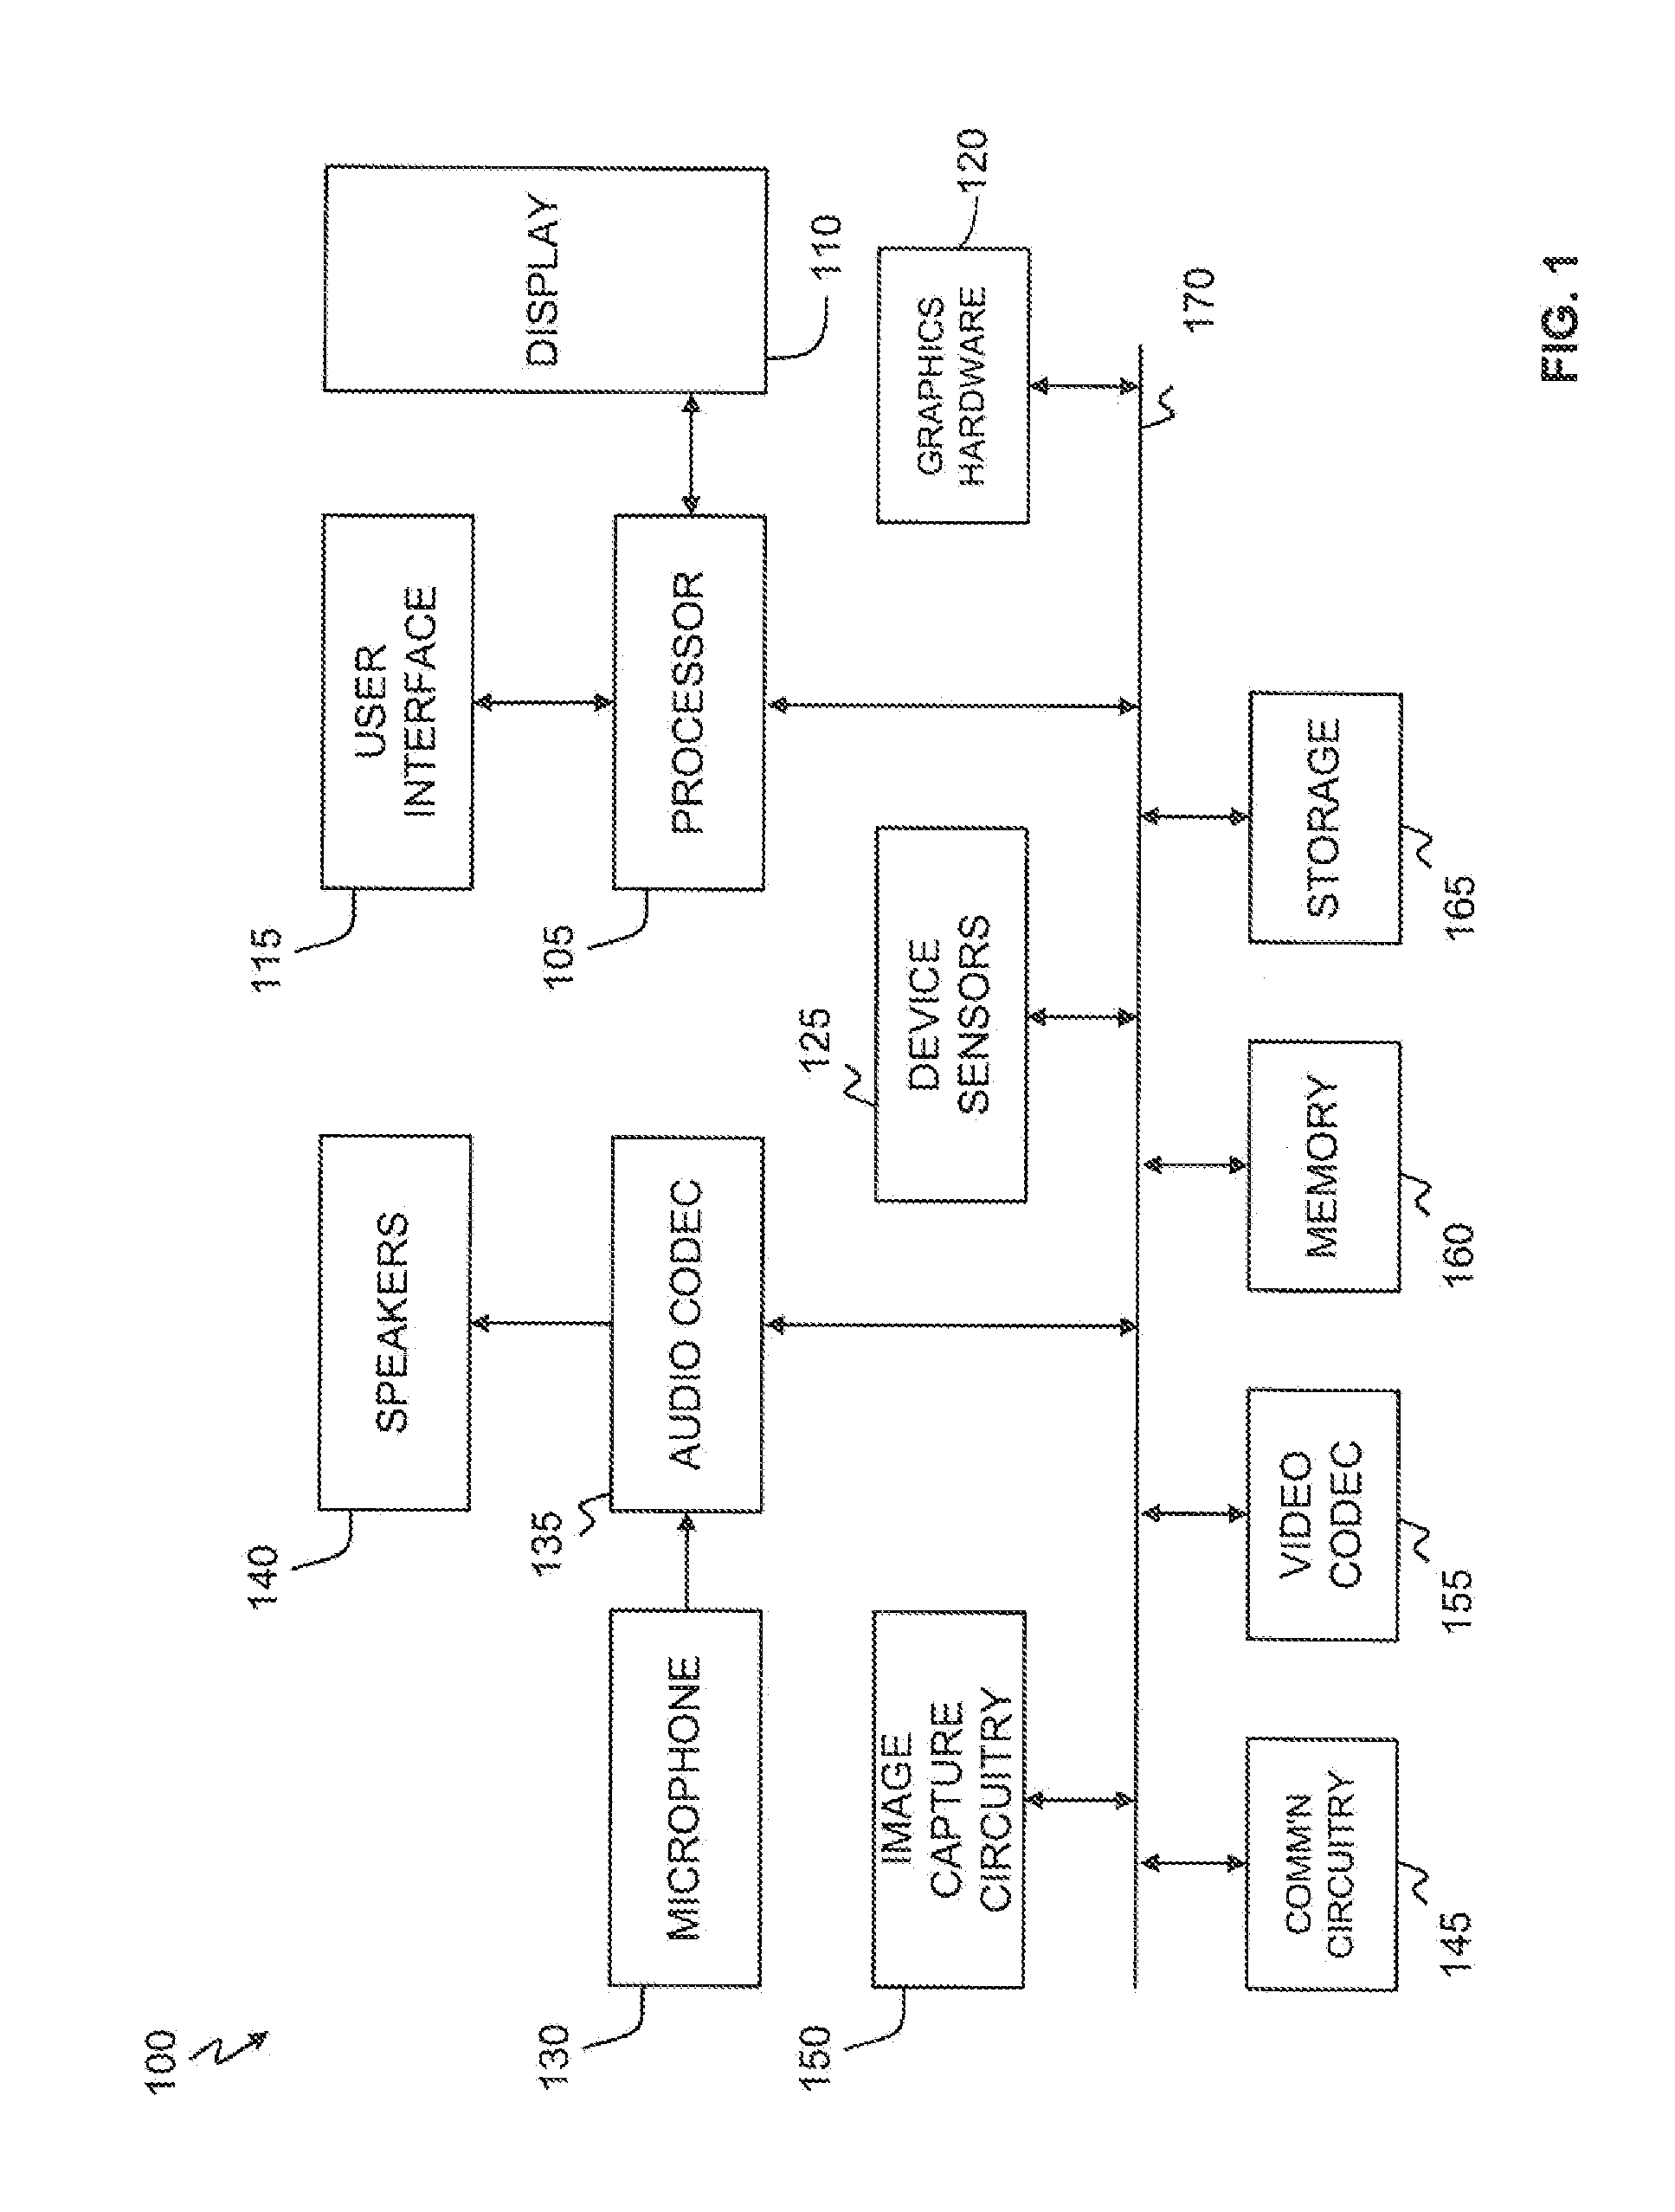 Method and Apparatus For Automatically Adjusting the Operation of Notifications Based on Changes in Physical Activity Level